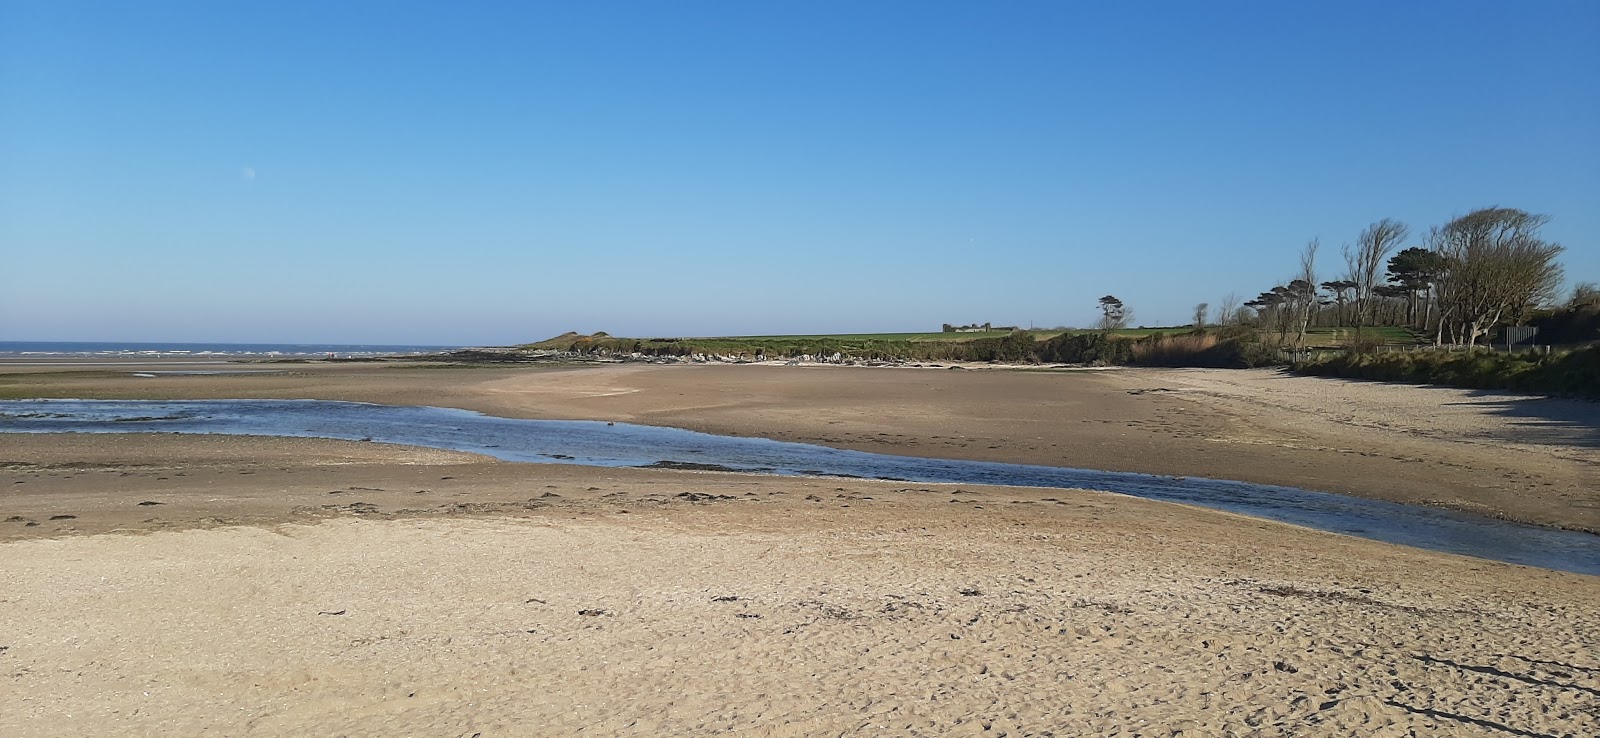 Photo of Gormanston Strand - popular place among relax connoisseurs